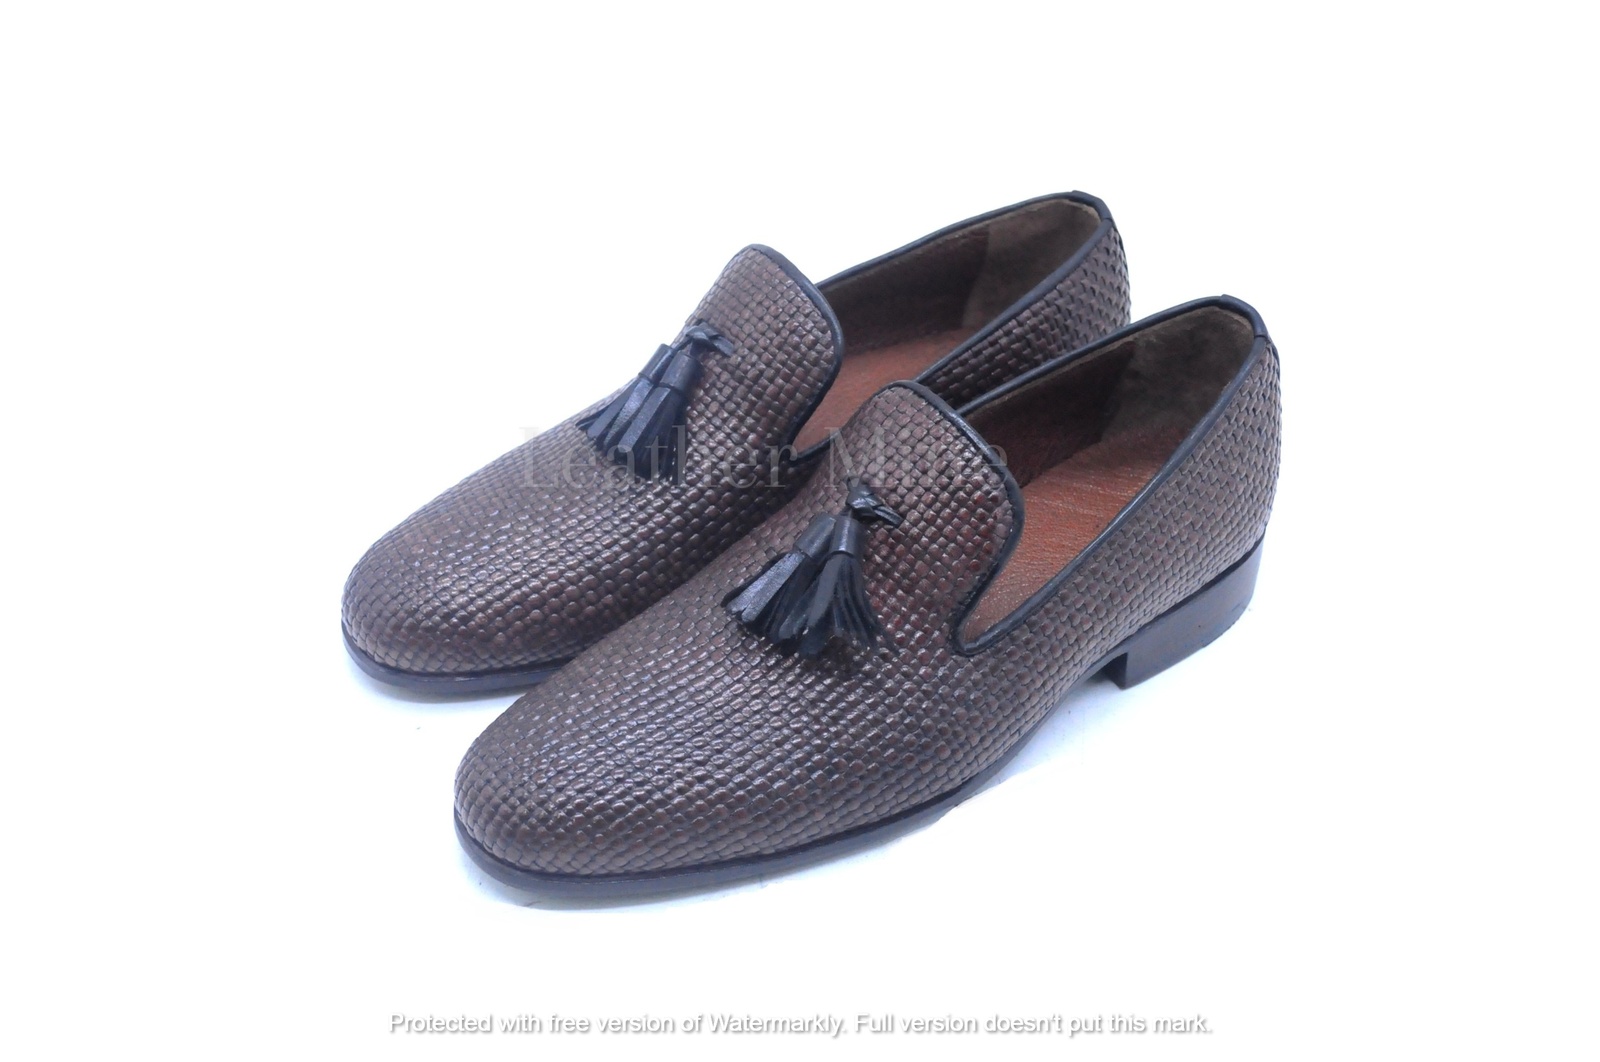 Leather Brown Woven Loafers shoes Men's, Handmade Formal Custom Made Shoes